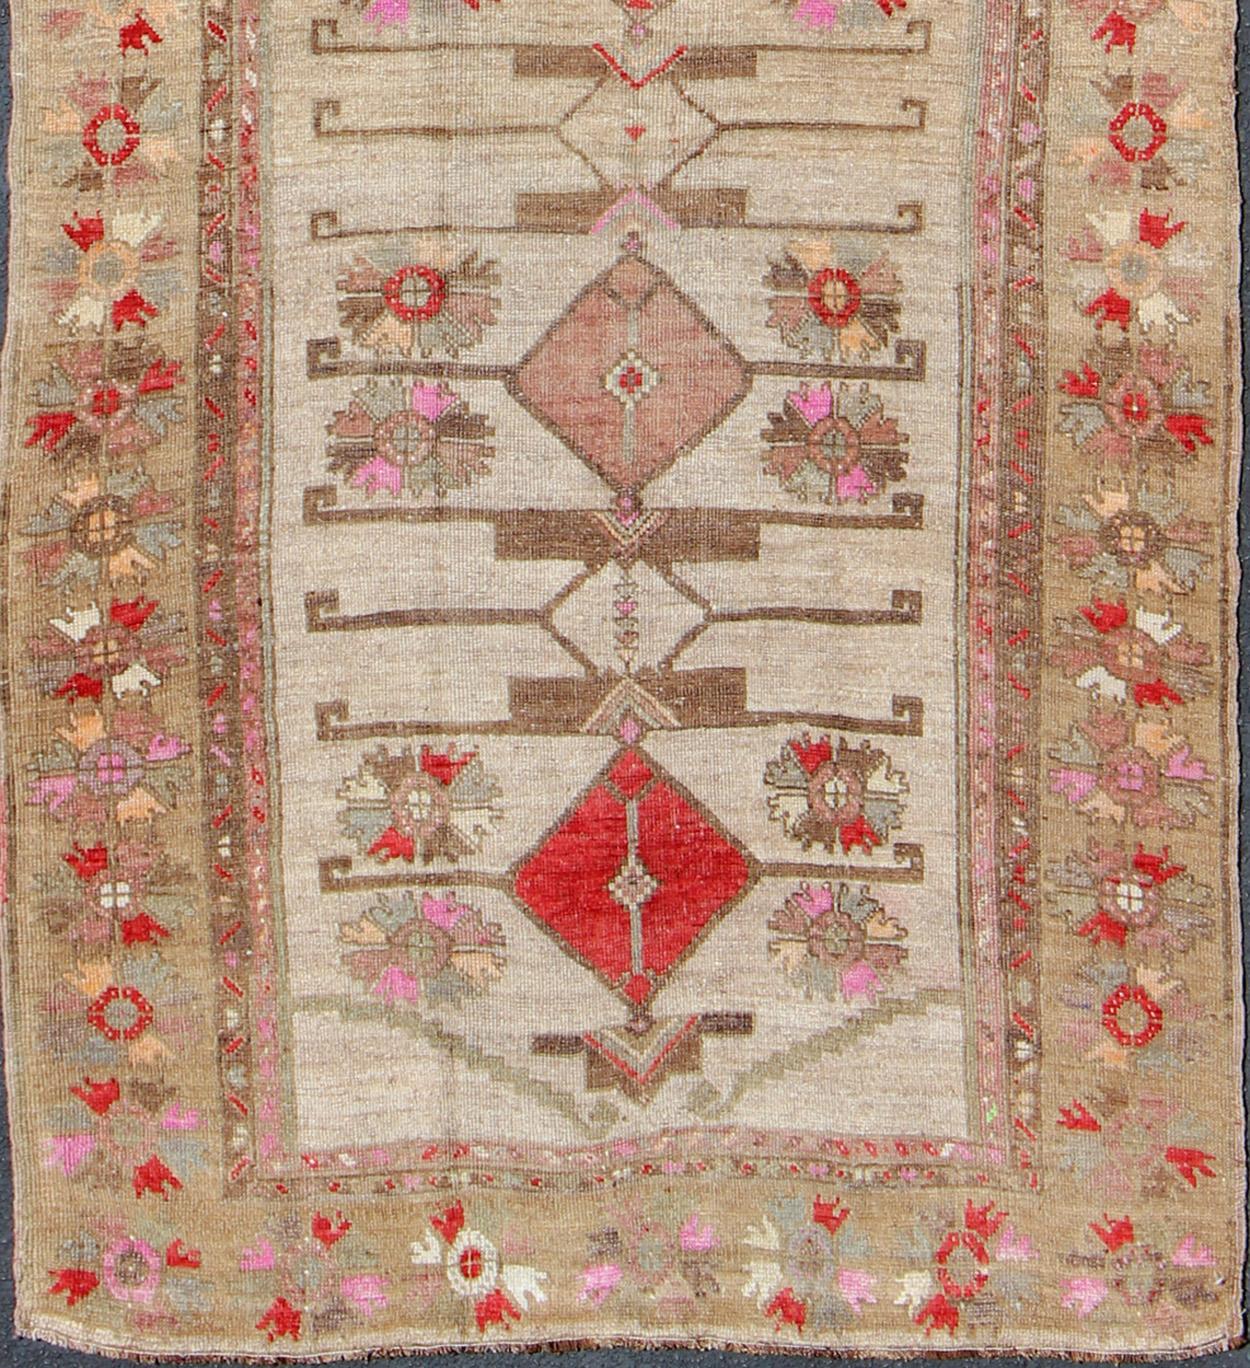 Vintage Turkish runner in red, pink, beige, tan, green, bright lavender, taupe, rug tu-ugu-4809, country of origin / type: Turkey / Oushak, circa 1950

This vintage runner features an assortment of tribal designs and flowers throughout its center